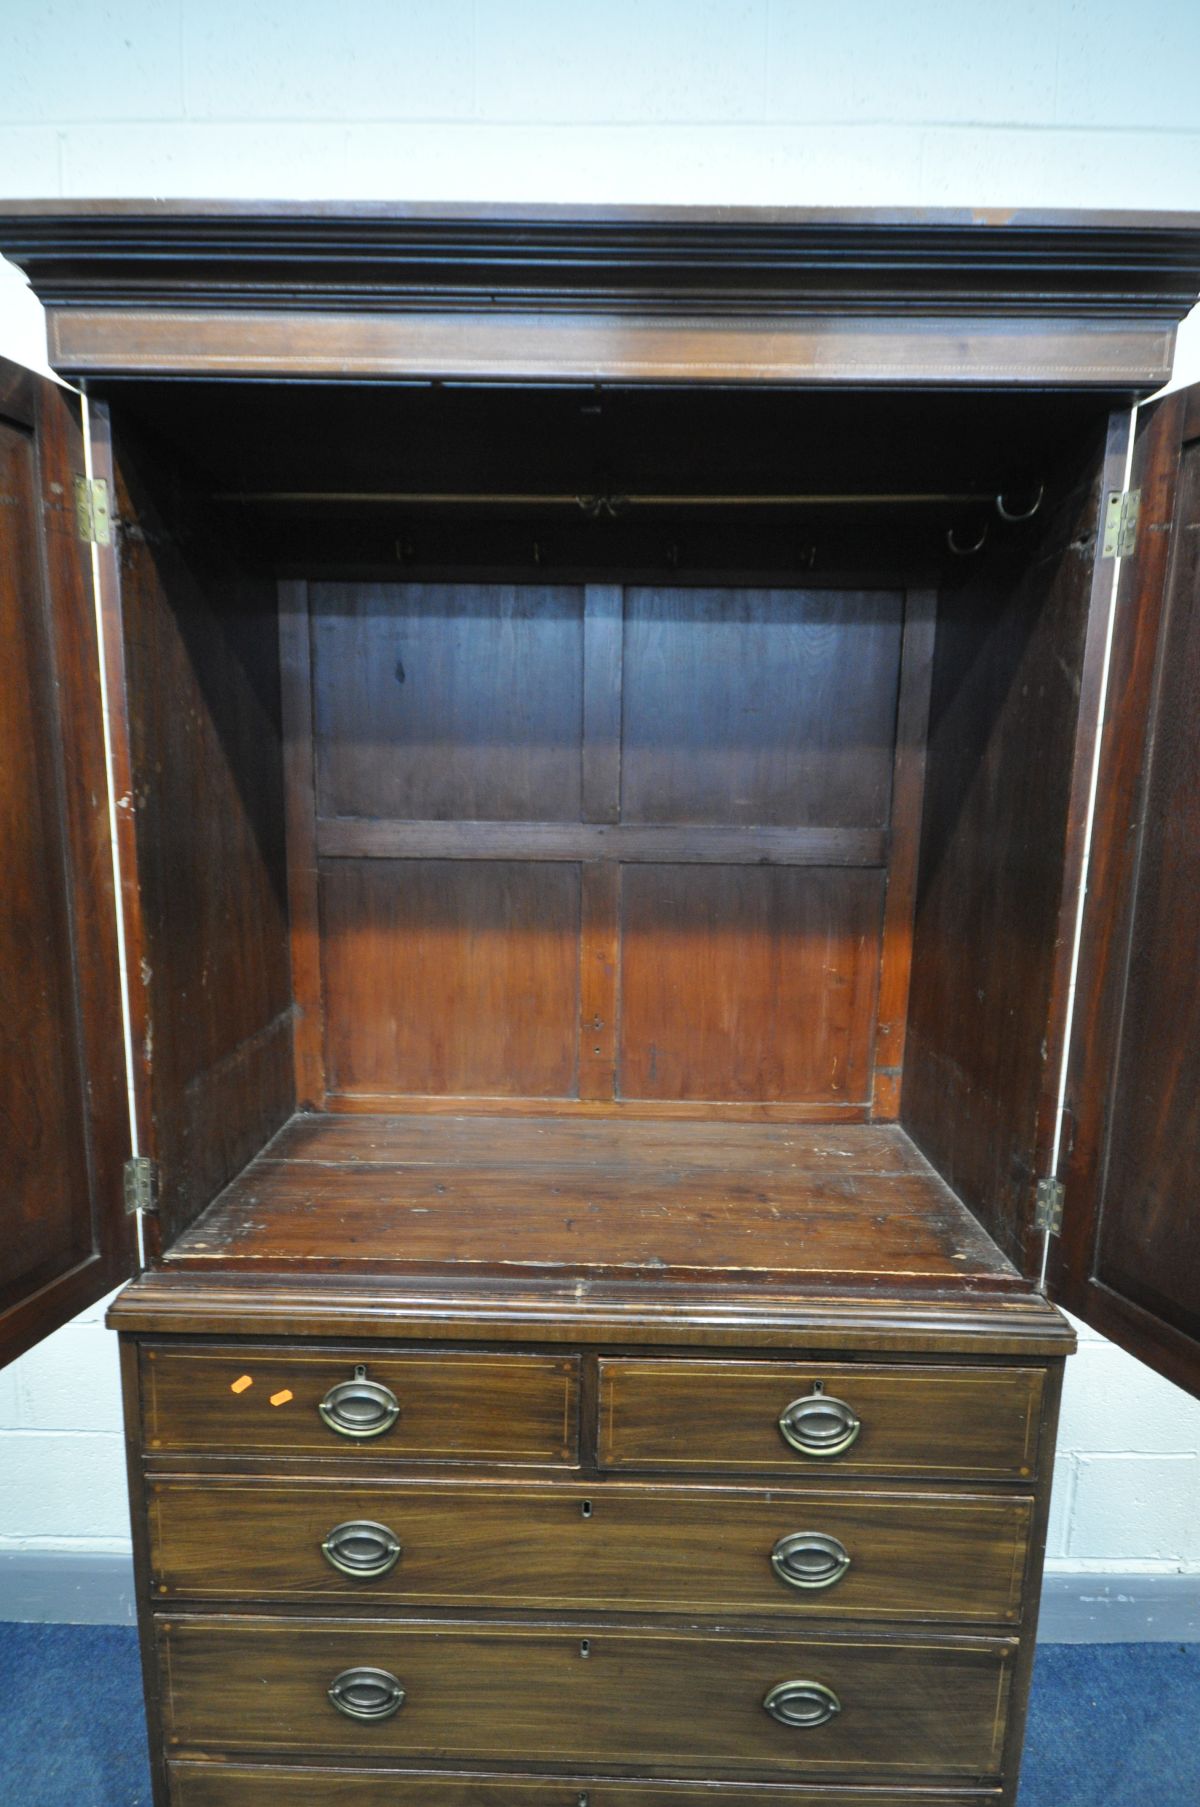 A GEORGIAN MAHOGANY LINEN PRESS, converted to a wardrobe, the double panelled doors enclosing - Image 2 of 4